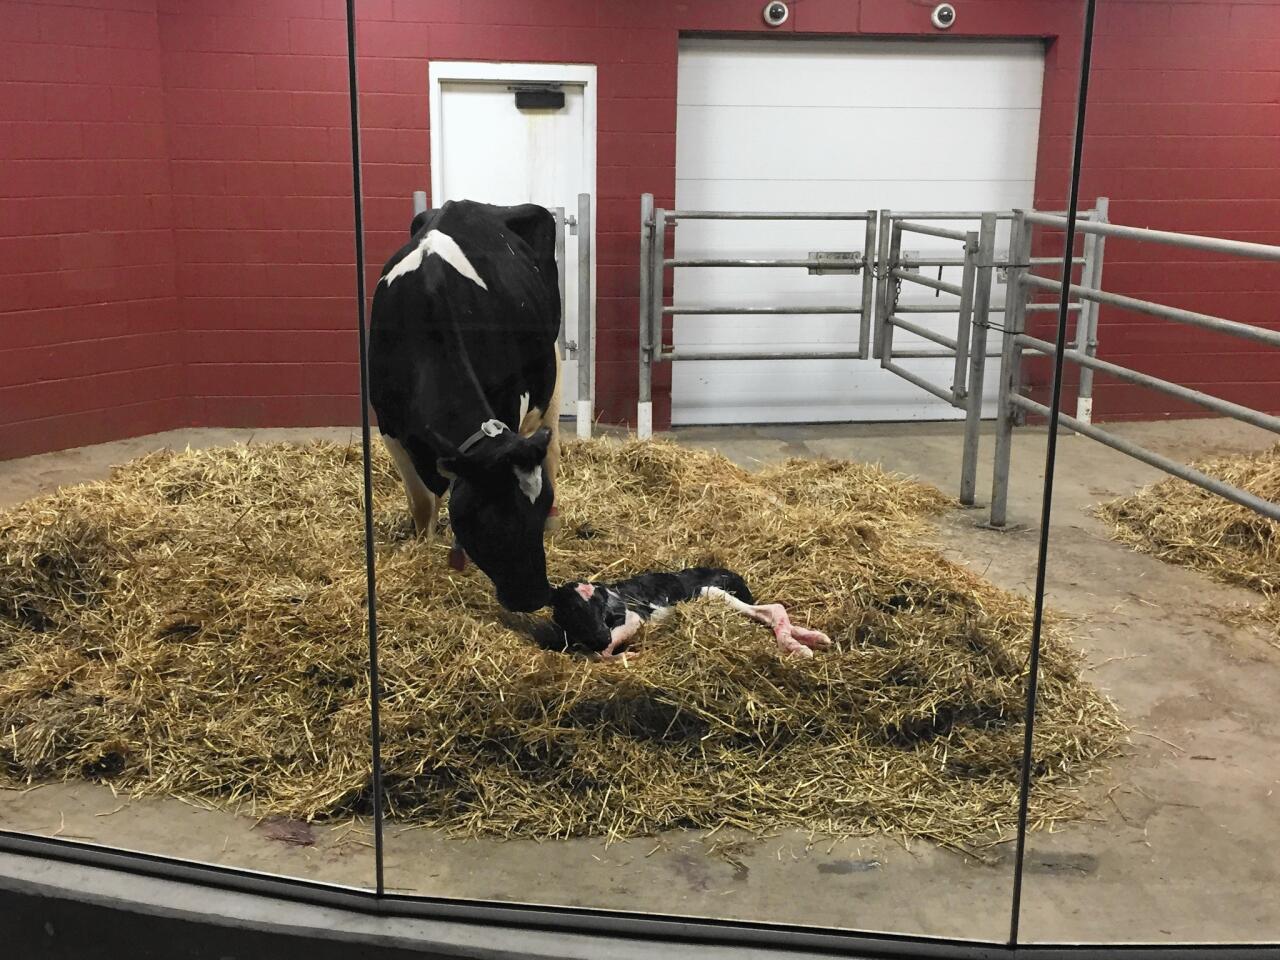 A newborn calf takes about 45 minutes before it can stand on its own legs. This one is just a few minutes old and was delivered in front of onlookers at the Fair Oaks Farms' birthing barn.